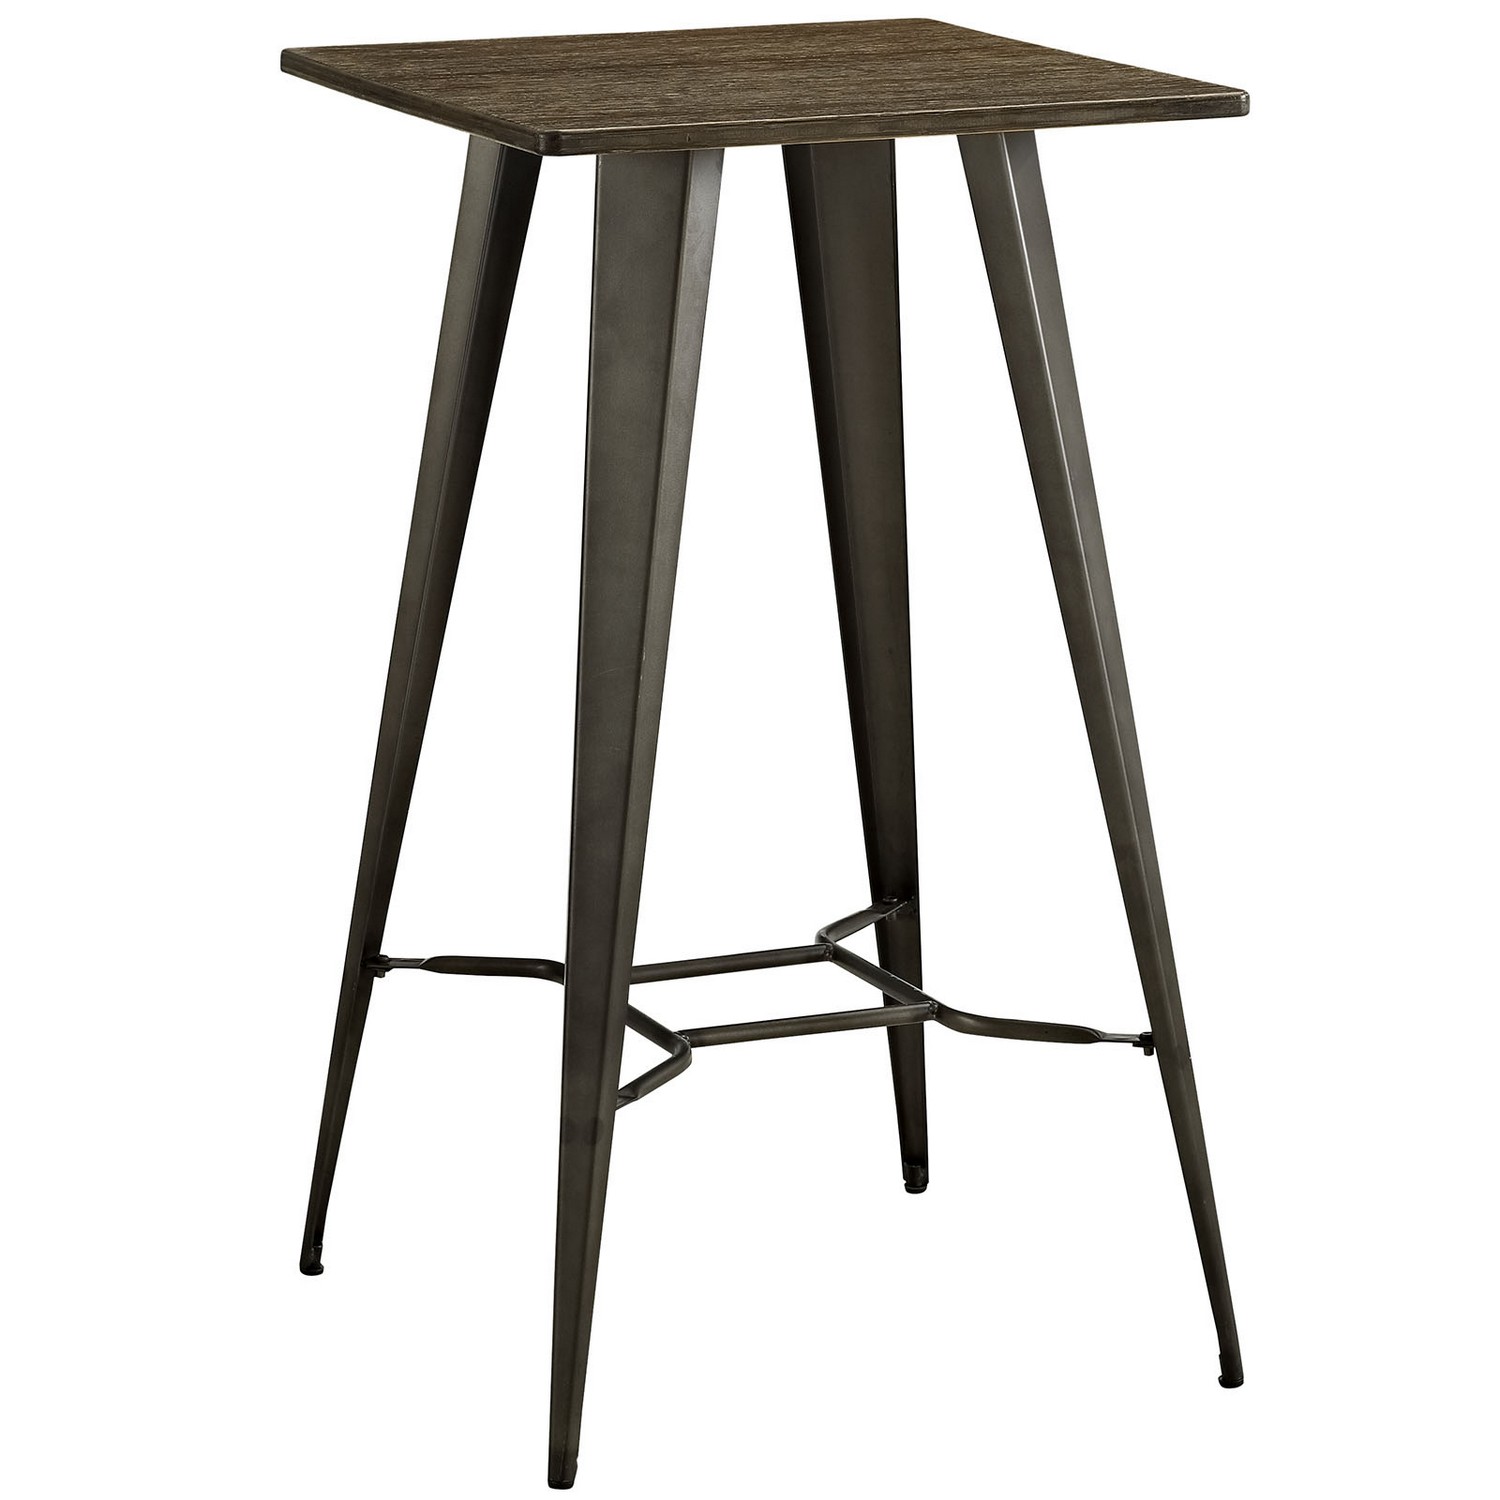 Modway Direct Bar Table - Brown